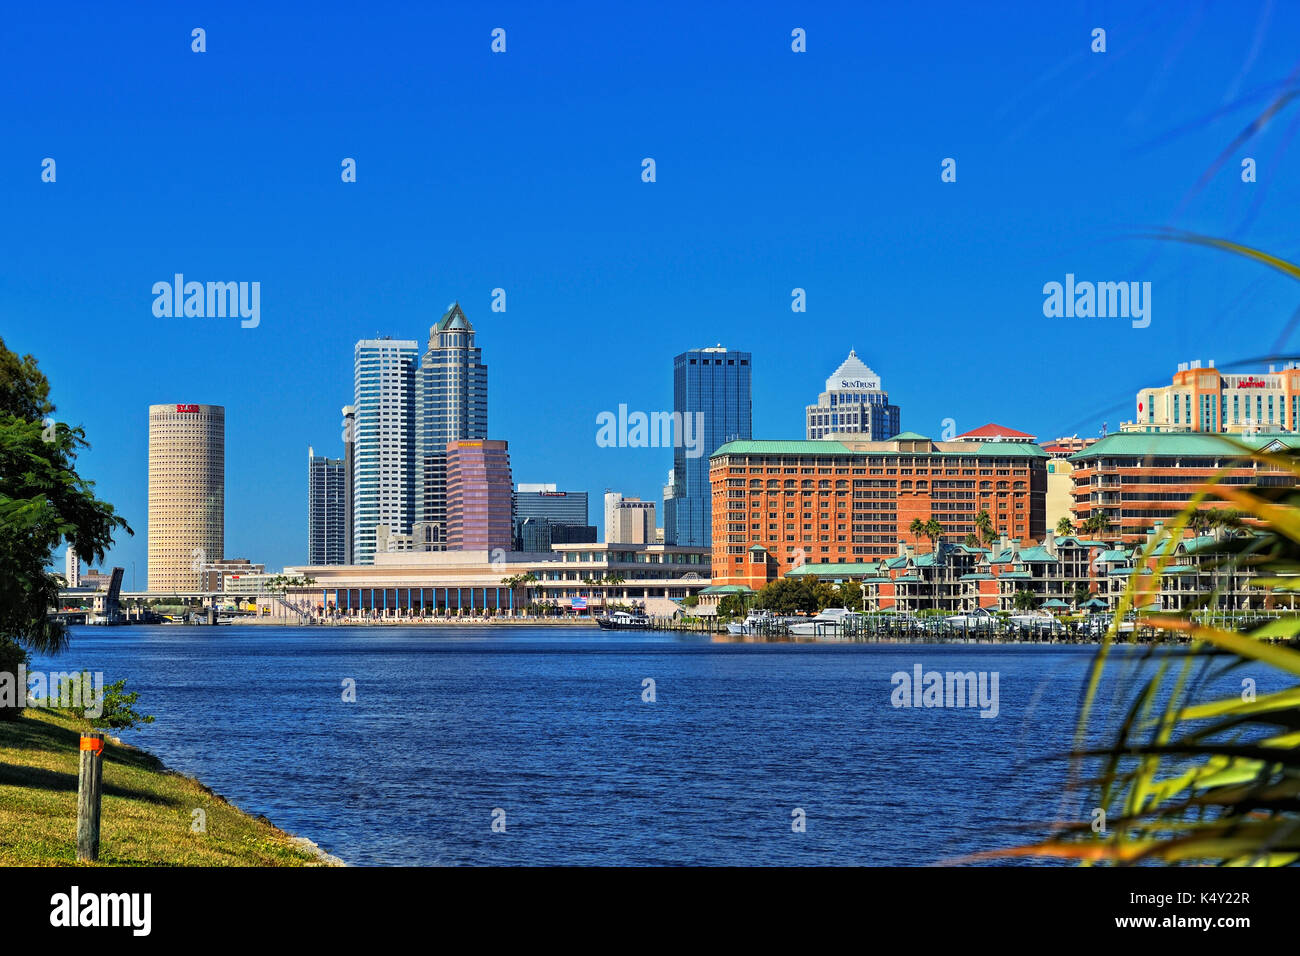 Tampa Florida skyline showing The Westin Tampa Waterside hotel on Harbor Island and the high rise buildings of downtown Tampa, right on Tampa Bay. Stock Photo